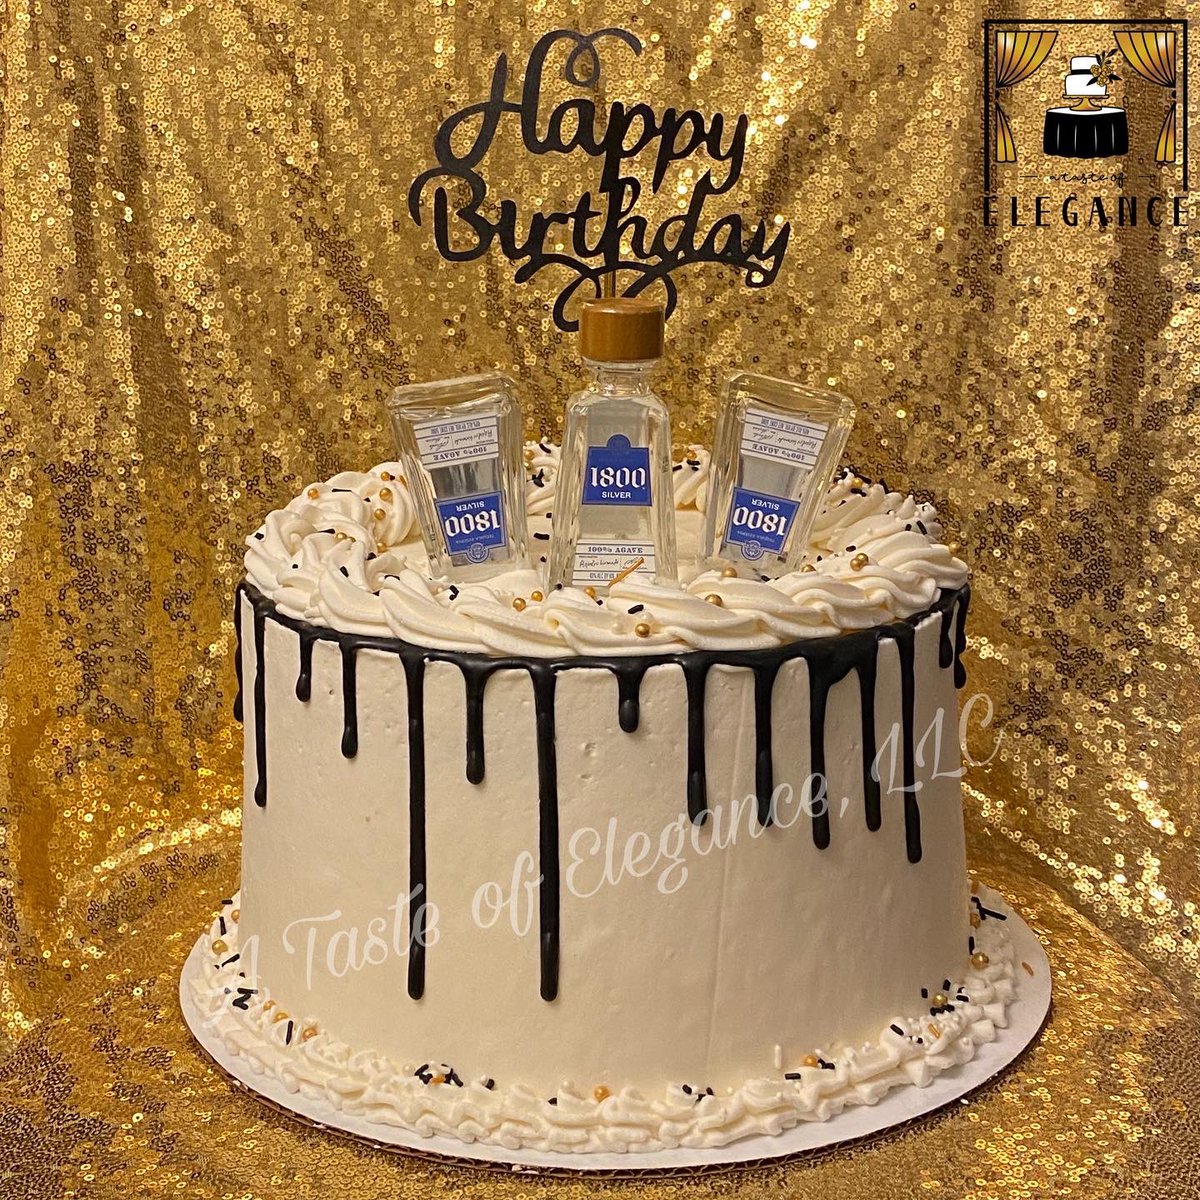 What’s a party without cake and tequila? 🍸🍰

#yelpnctriangle #raleighdesserts #raleigheats #raleighfoodies #raleighfoodpics #ncfood #raleighsbestbites #nceats #rdueats #raleighfood #raleighisgrowing #ncfoodie #raleighbaker #raleighbakery #raleighfoodie
#ncfoodies #visitraleigh